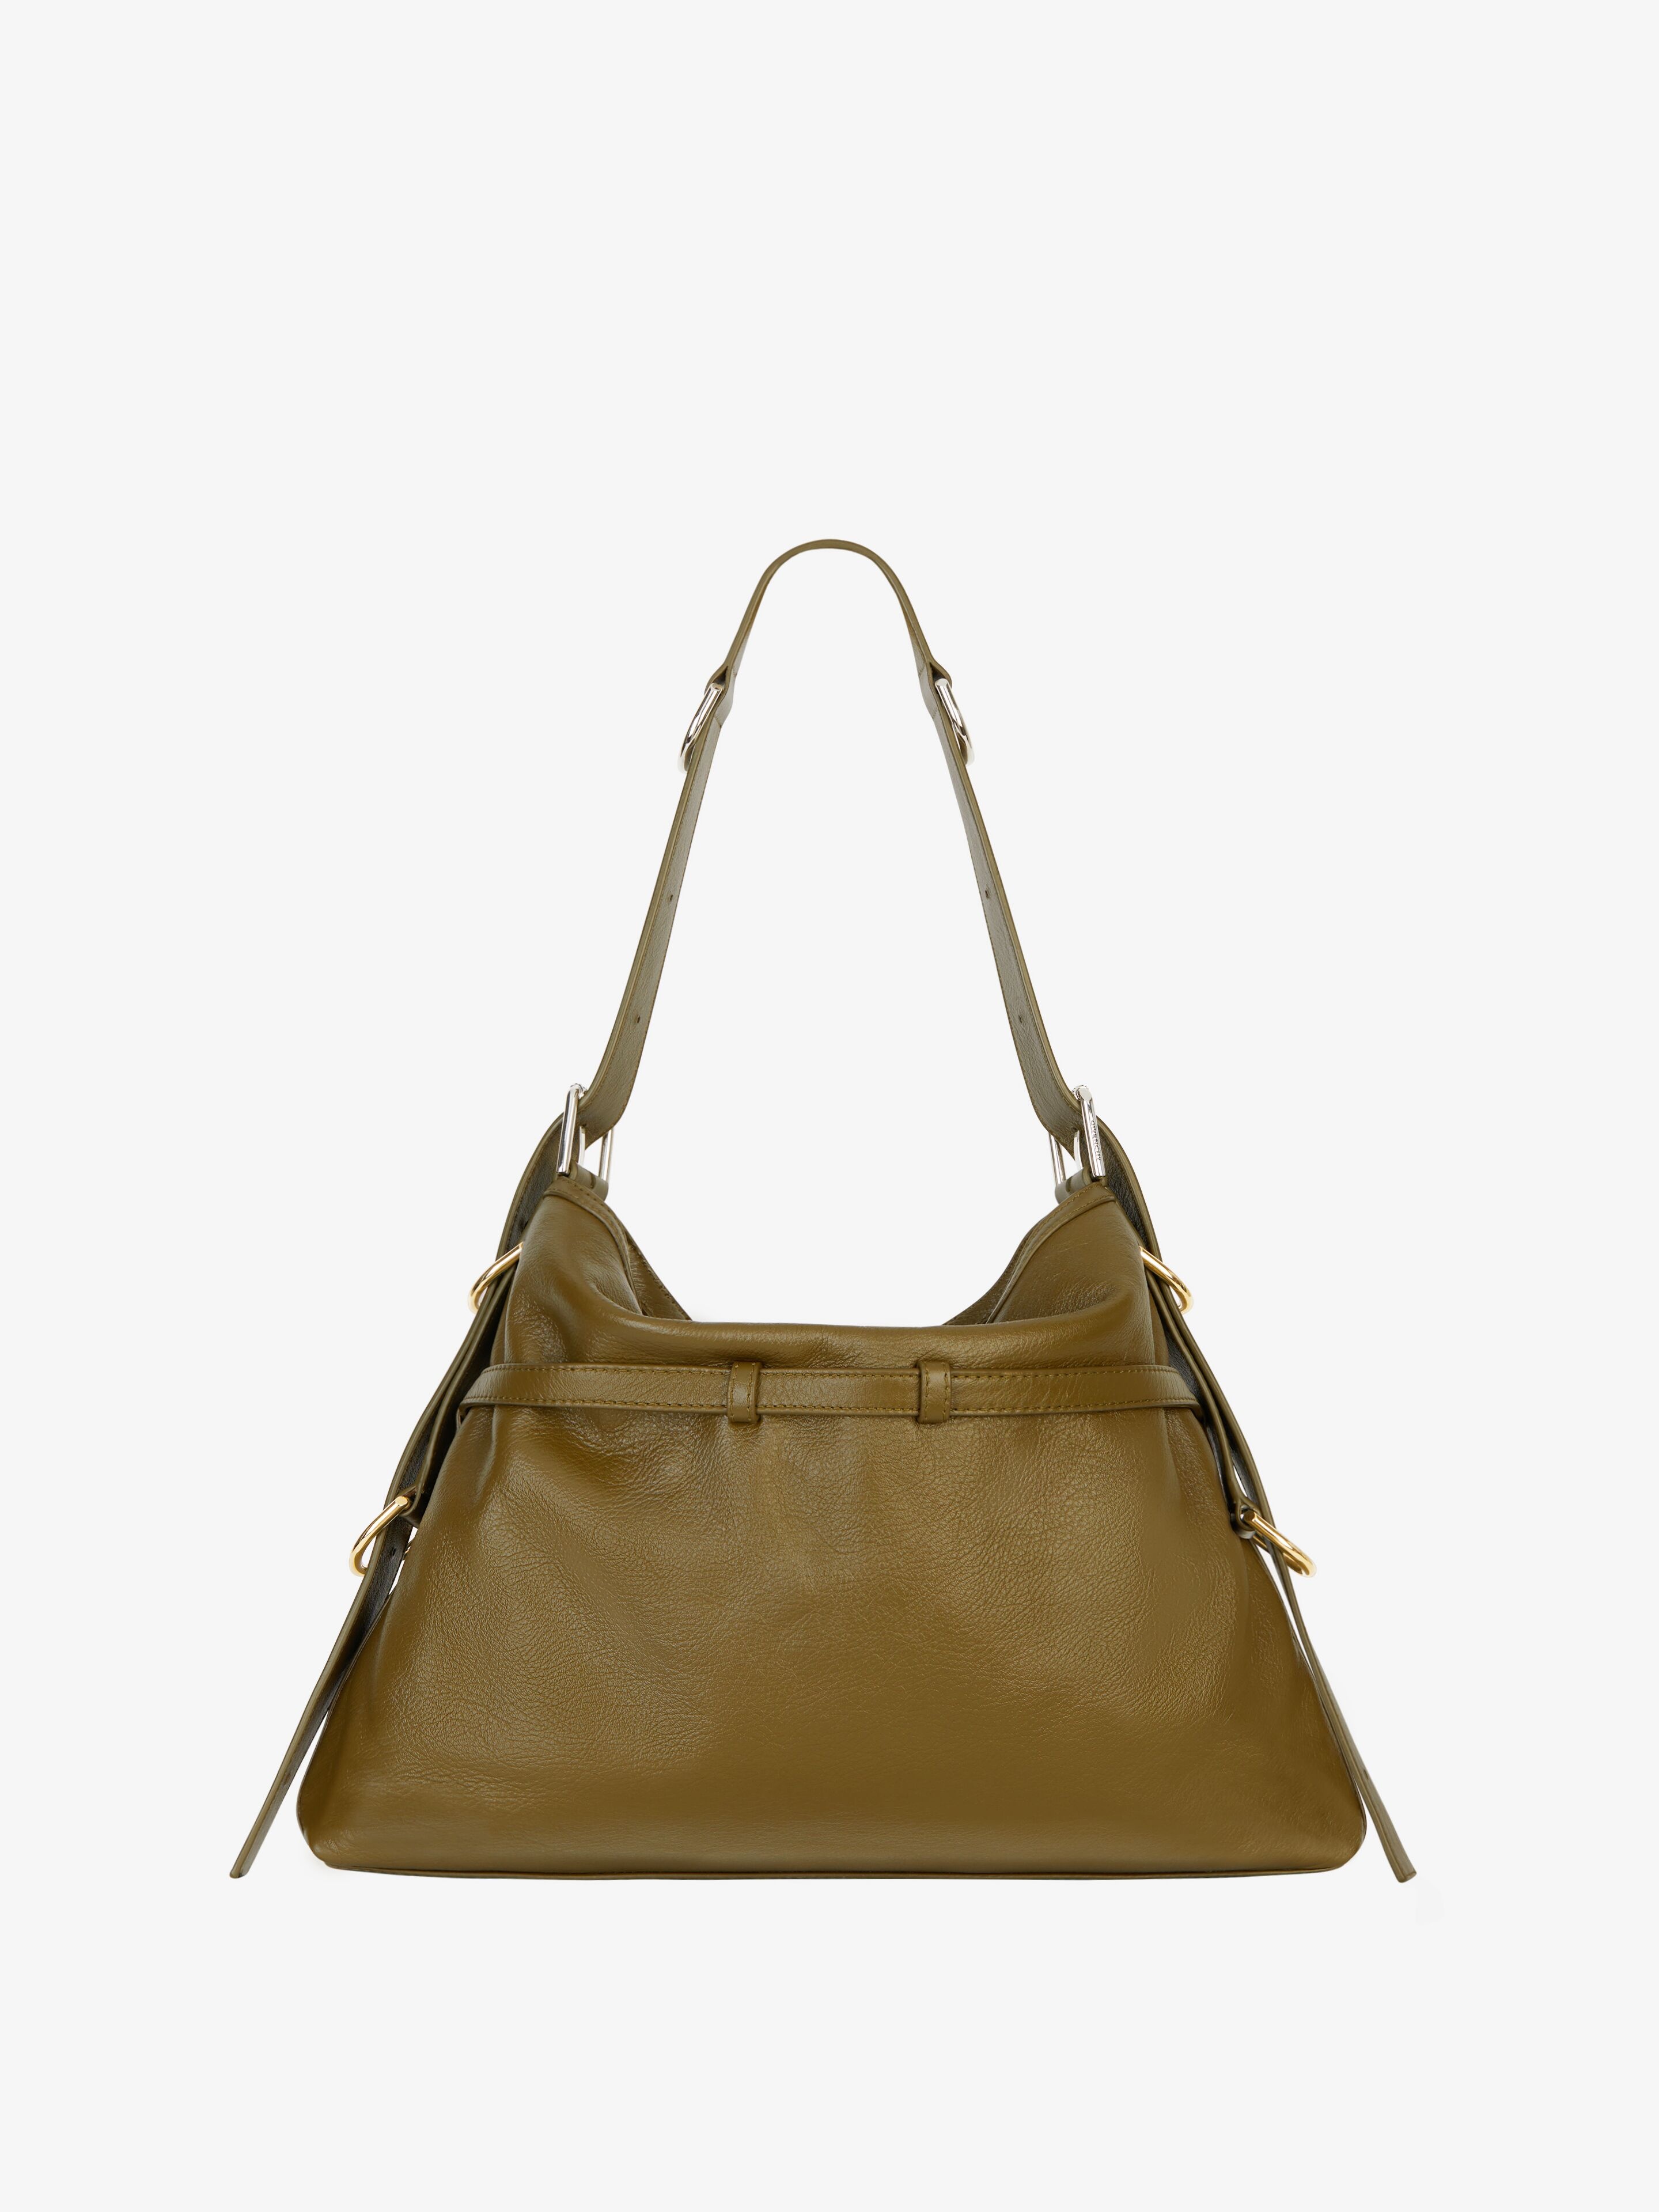 MEDIUM VOYOU BAG IN LEATHER - 4